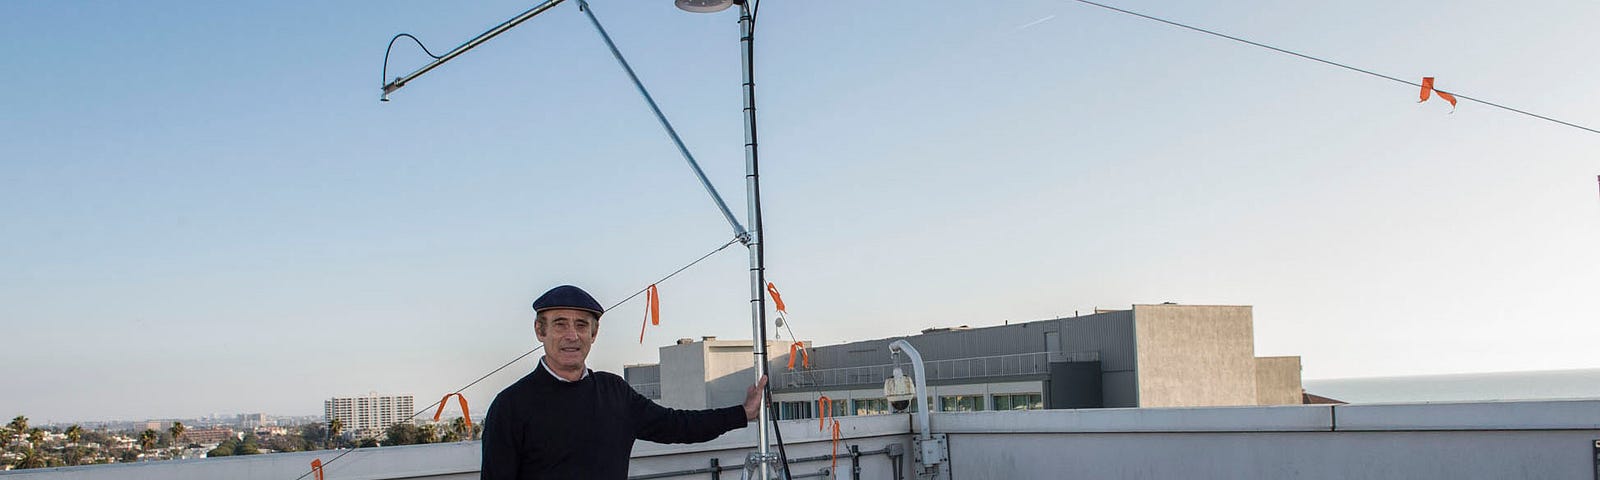 RAND researcher Robert Lempert with the newly installed array of data-generating sensors on the roof of RAND’s Santa Monica headquarters. Photo by Diane Baldwin/RAND Corporation